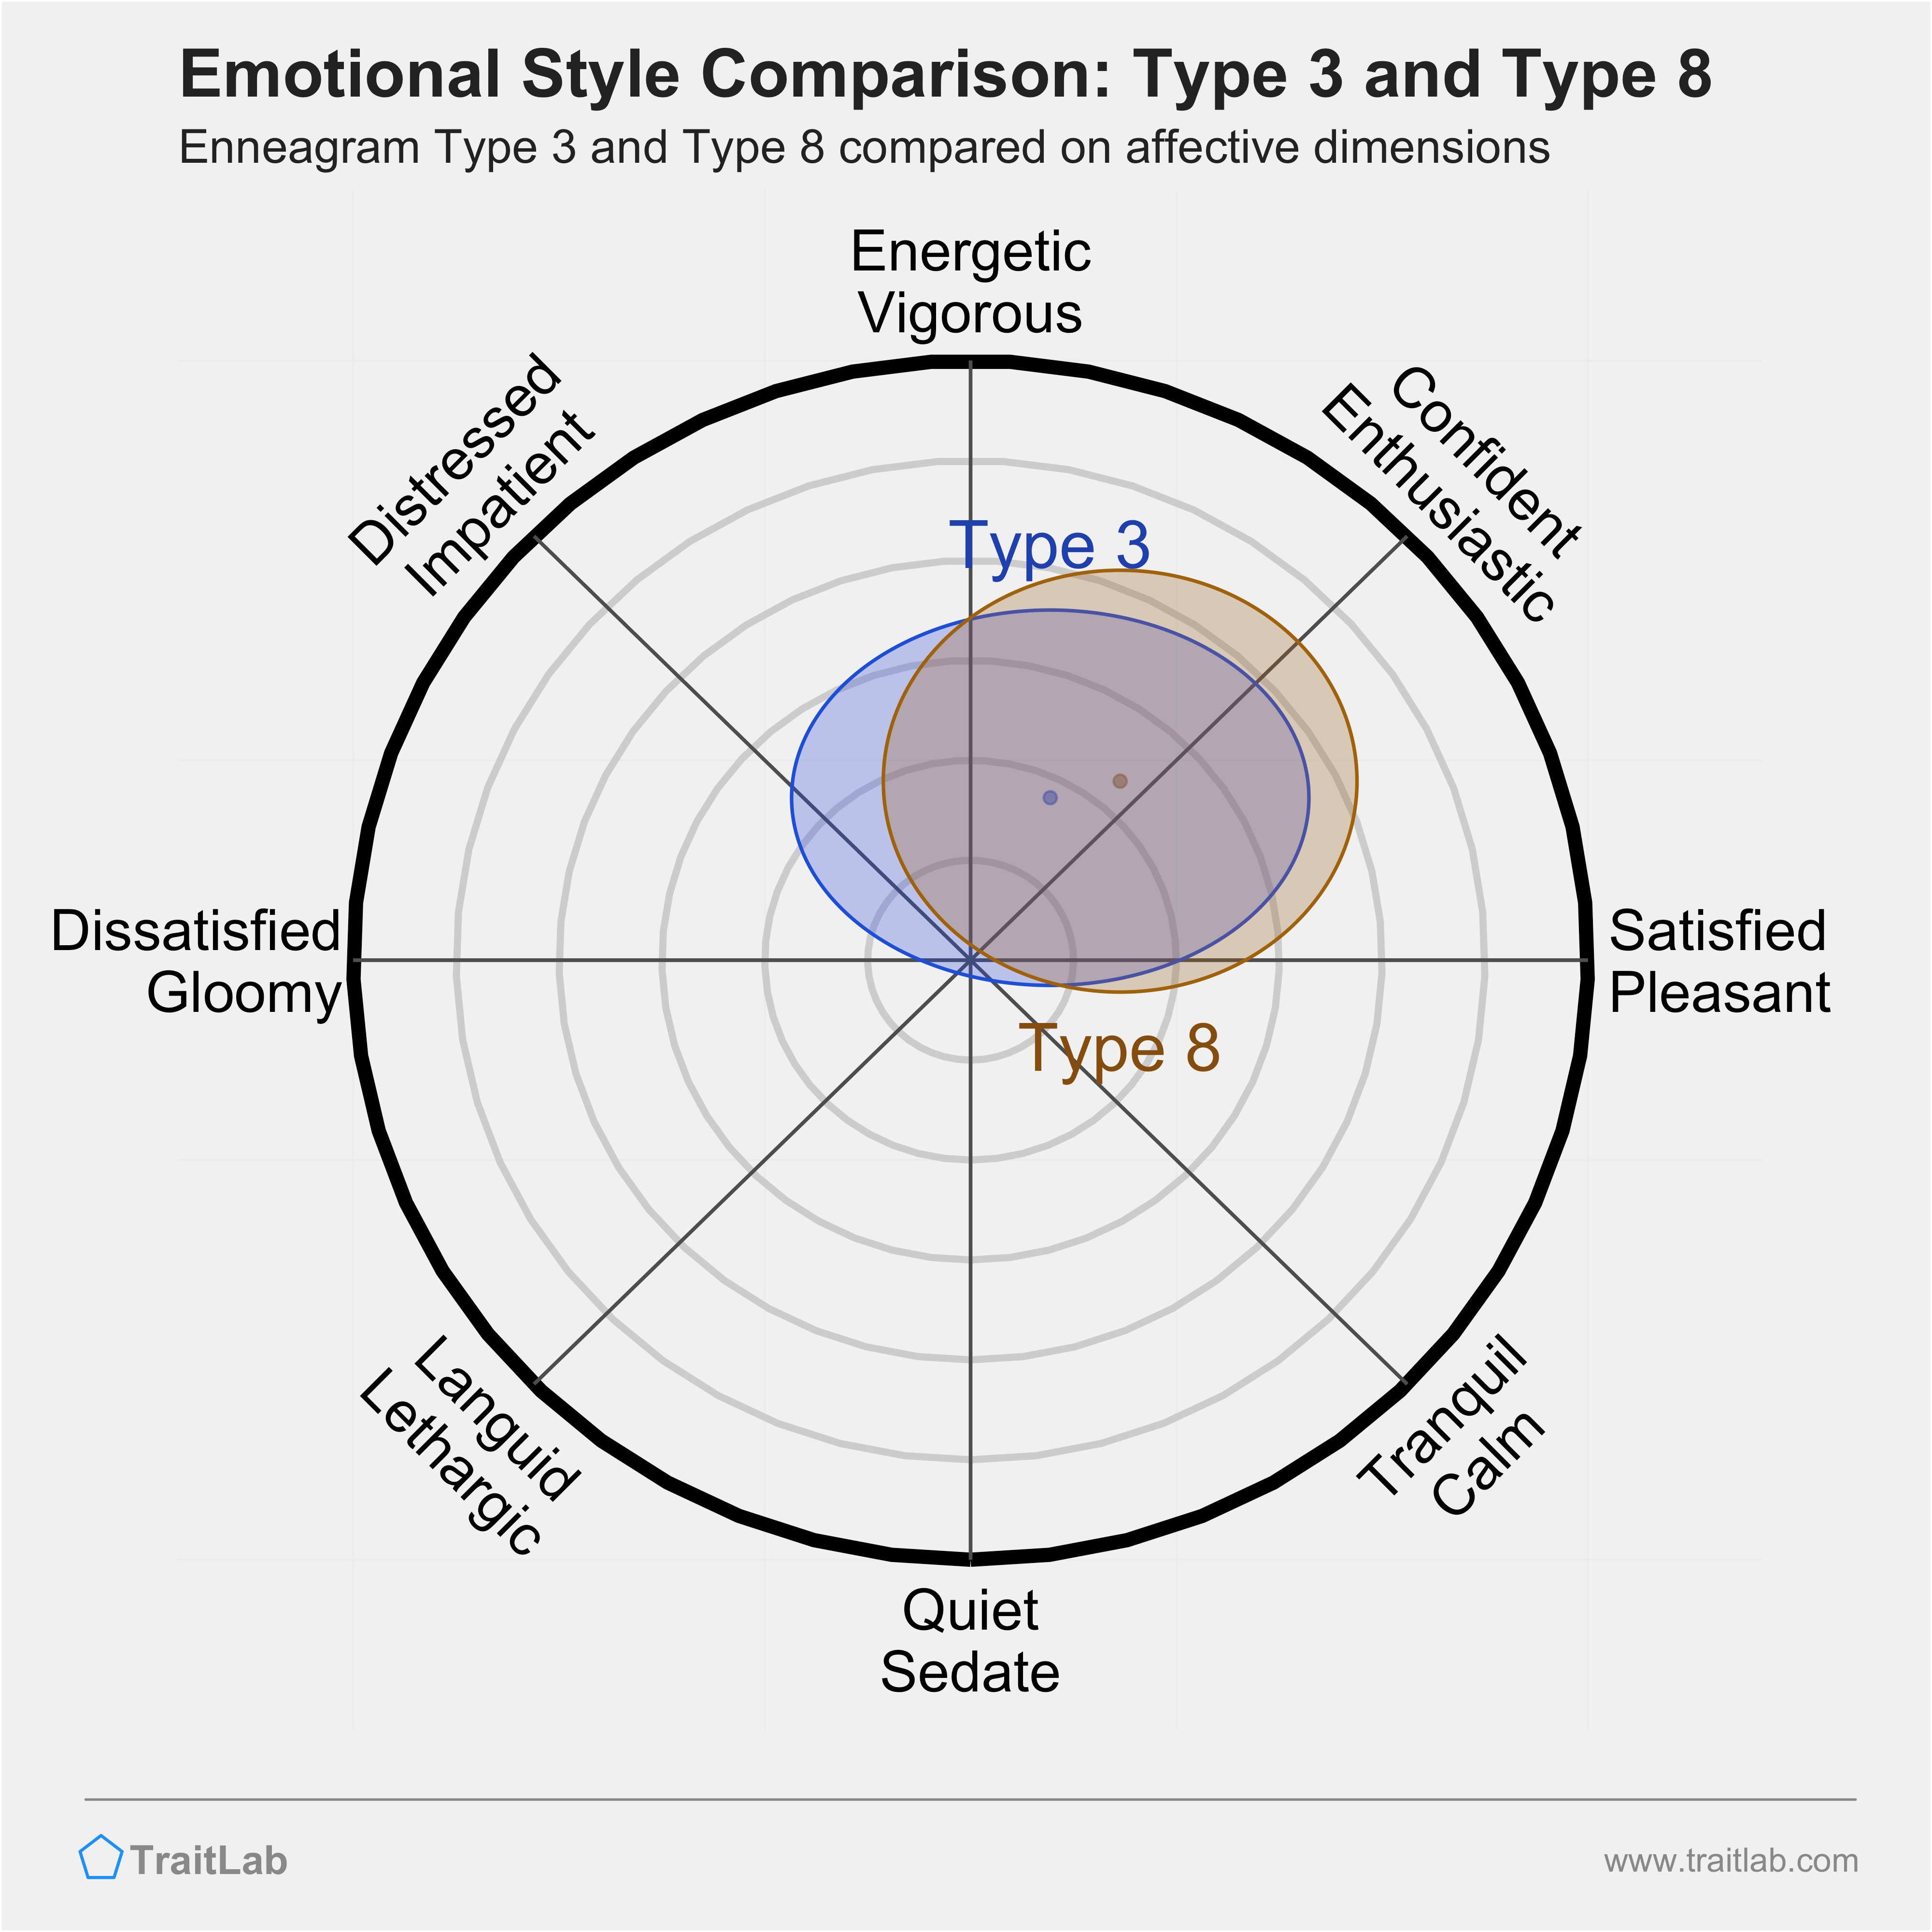 Type 3 and Type 8 comparison across emotional (affective) dimensions